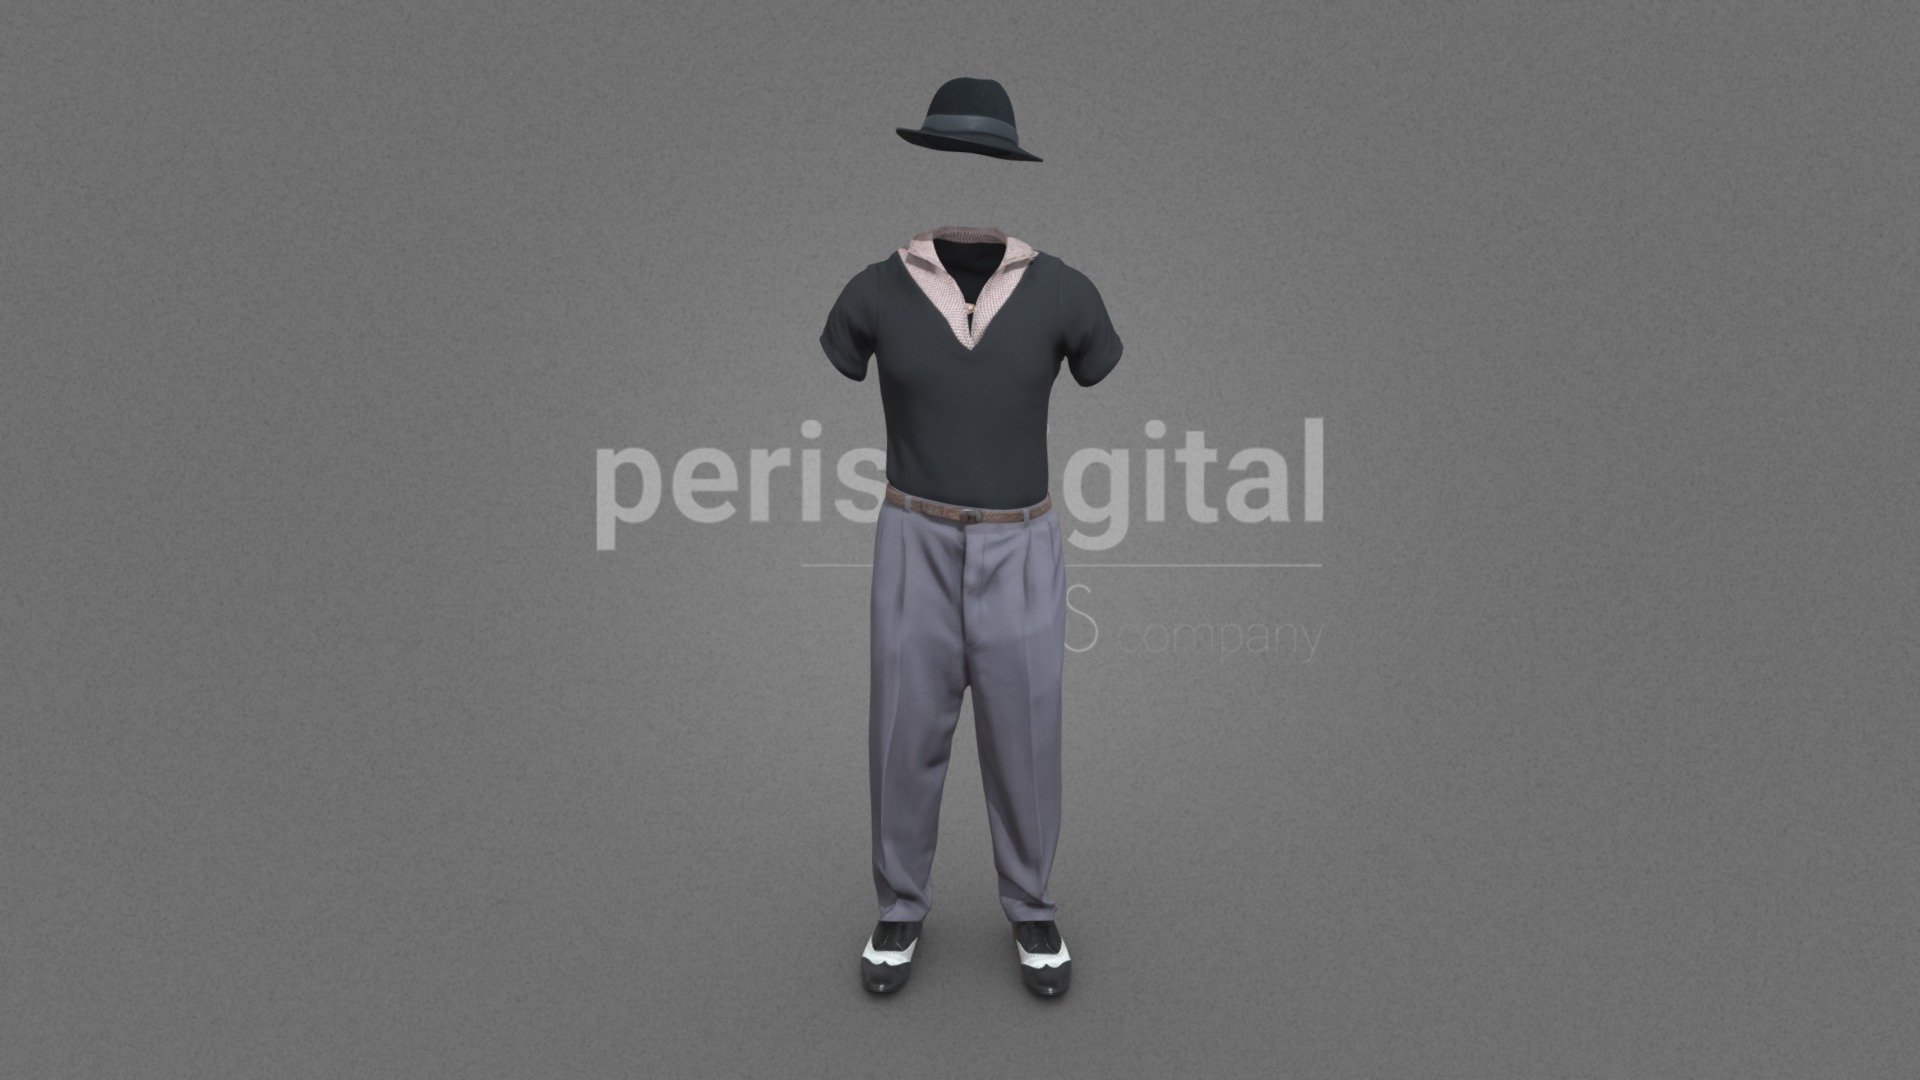 Black hat, blue short sleeve printed v-neck polo shirt, gray dress pants, brown leather belt, black leather belt, black oxford shoes with white trim

Our &ldquo;40s Fashion